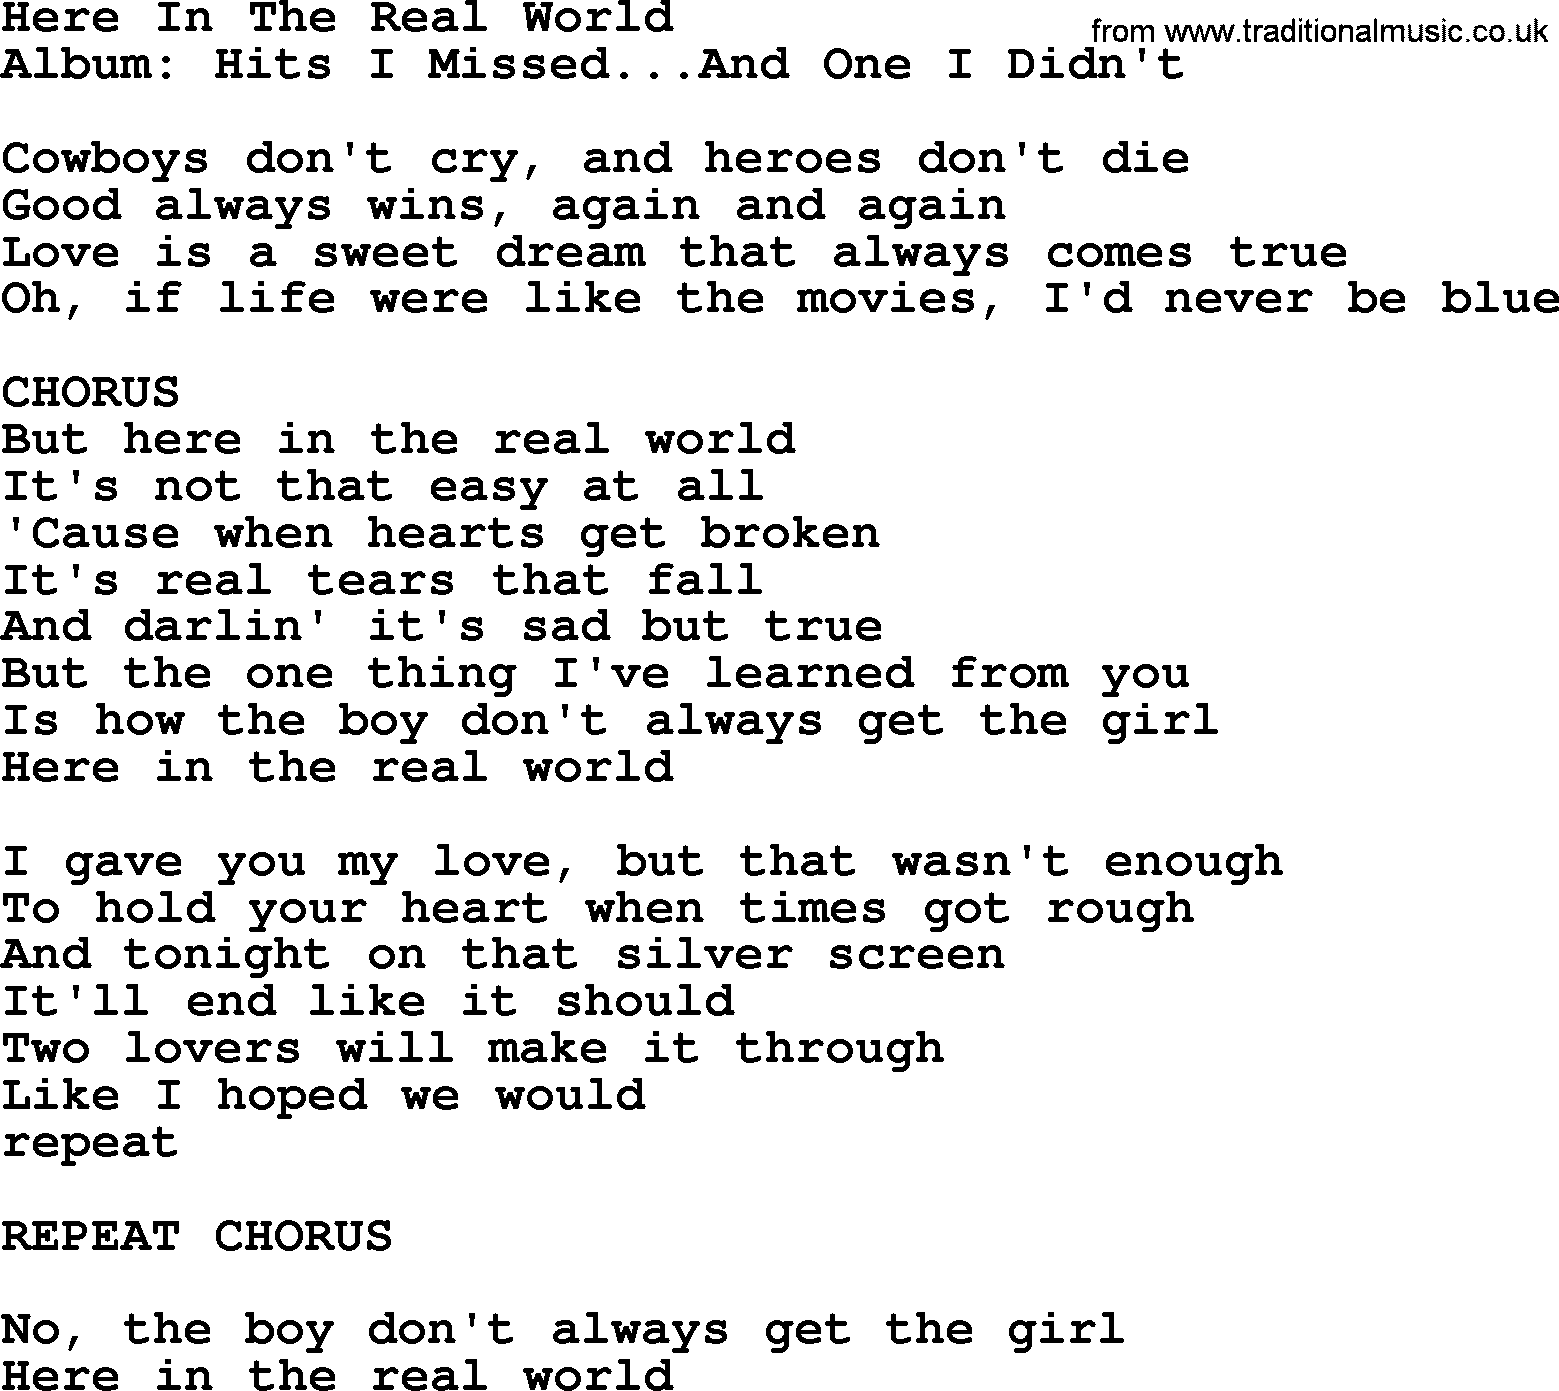 George Jones song: Here In The Real World, lyrics